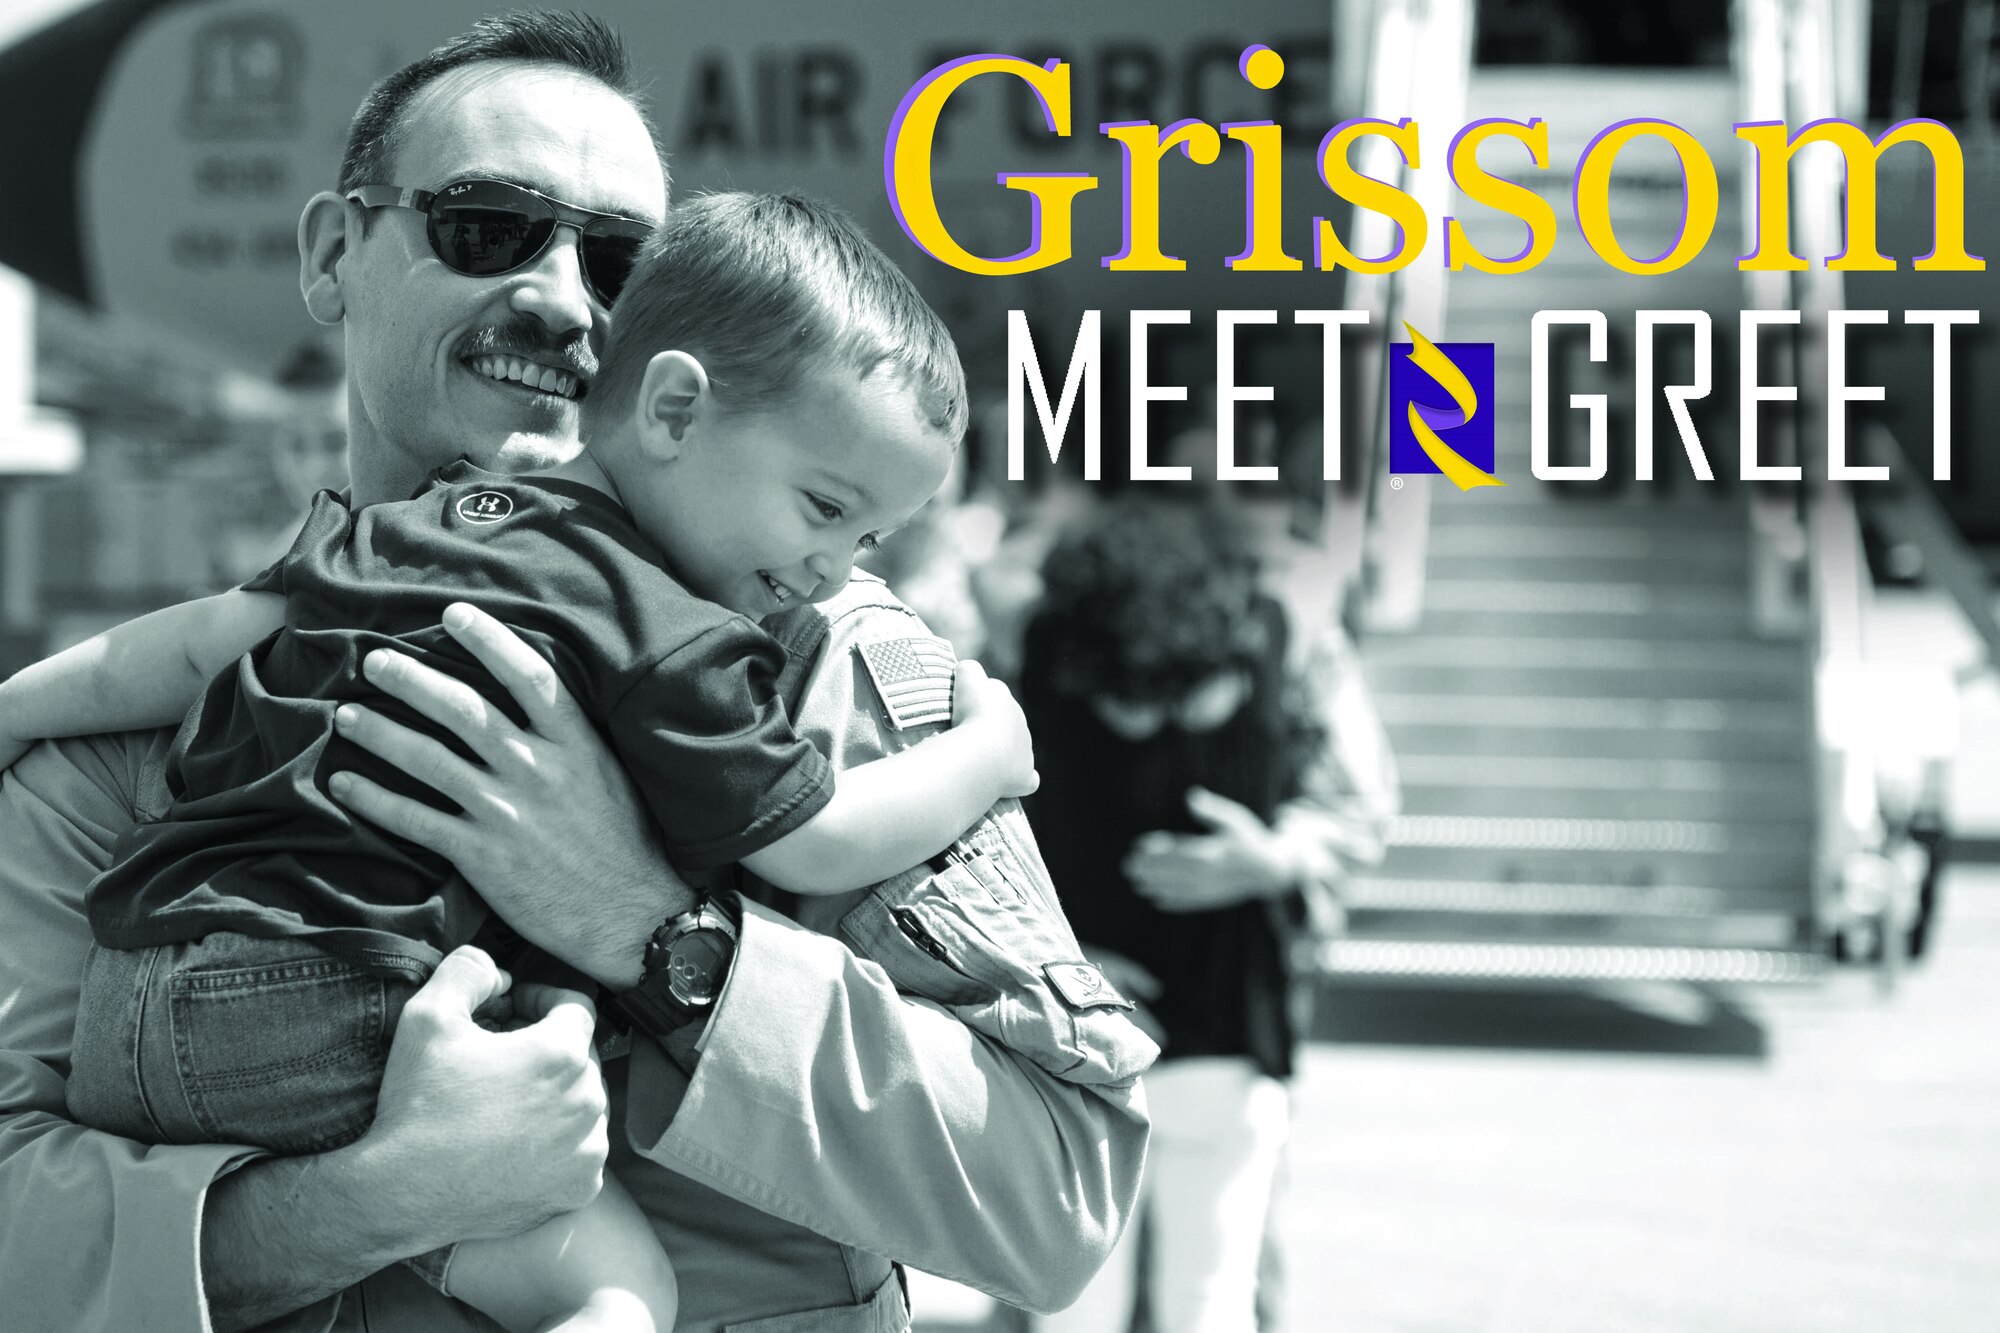 Grissom to host family meet, greet events